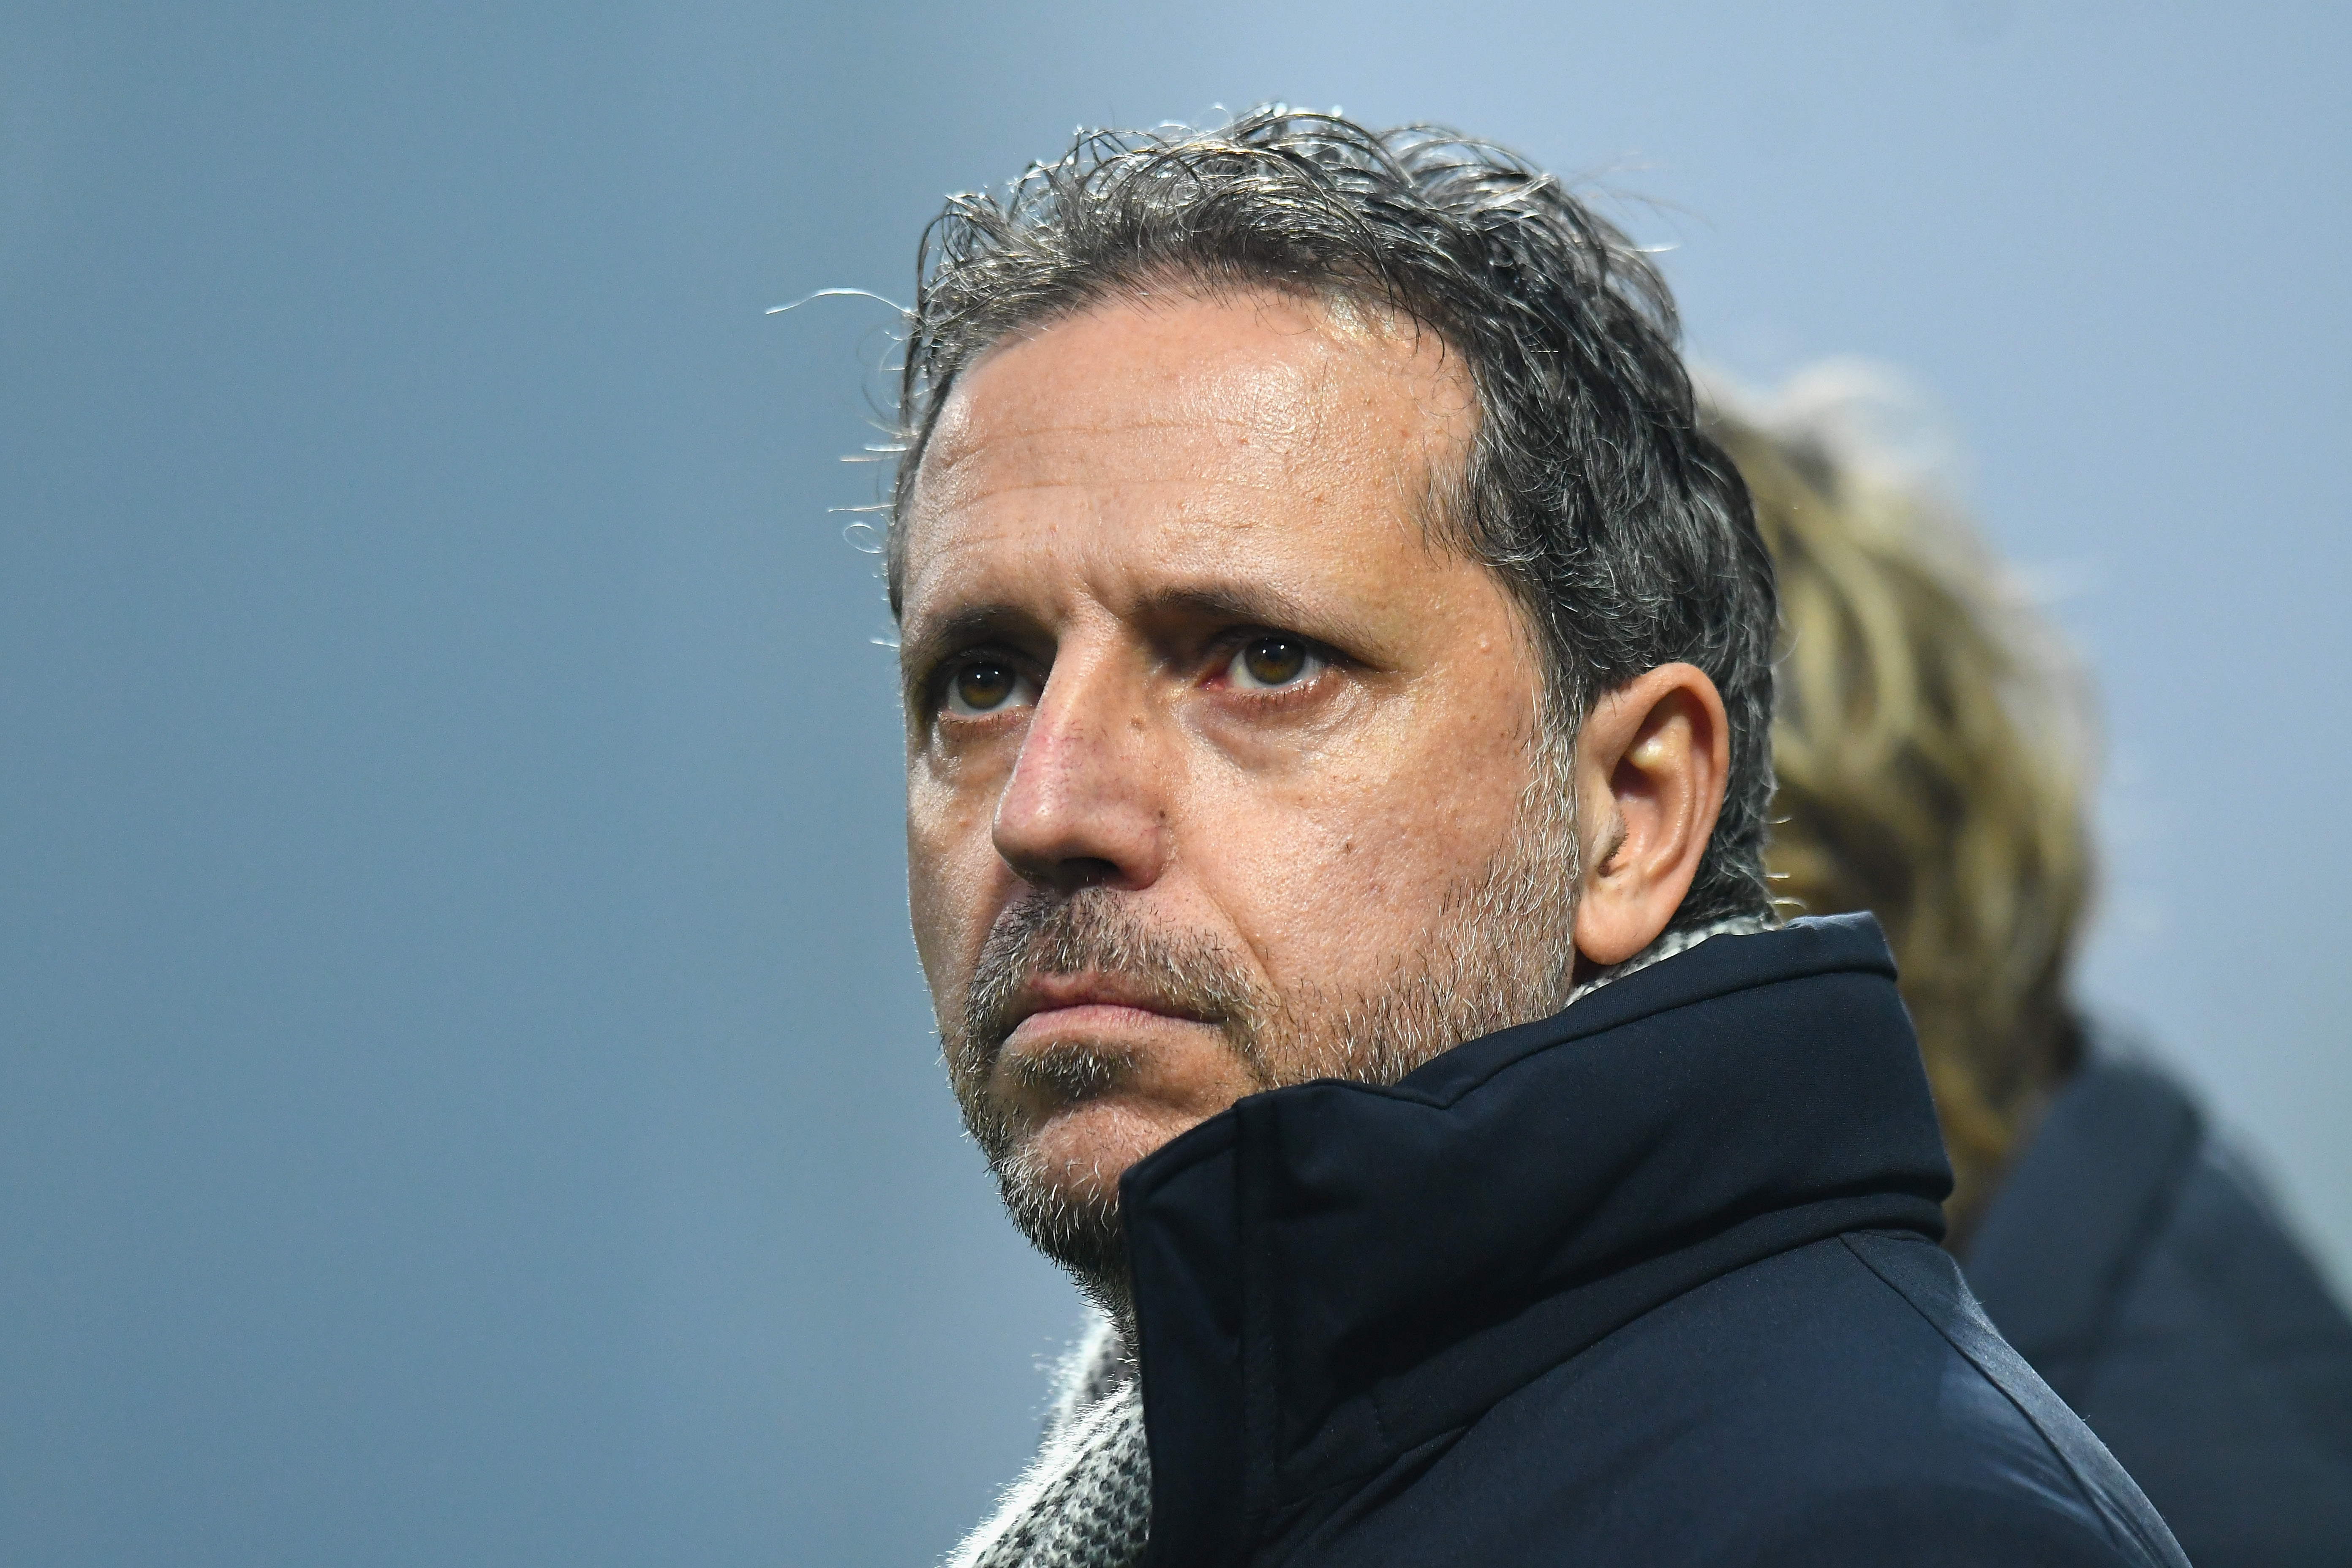 REGGIO NELL'EMILIA, ITALY - FEBRUARY 10: CEO of Juventus Fabio Paratici looks on during the Serie A match between US Sassuolo and Juventus at Mapei Stadium - Citta' del Tricolore on February 10, 2019 in Reggio nell'Emilia, Italy.  (Photo by Alessandro Sabattini/Getty Images)